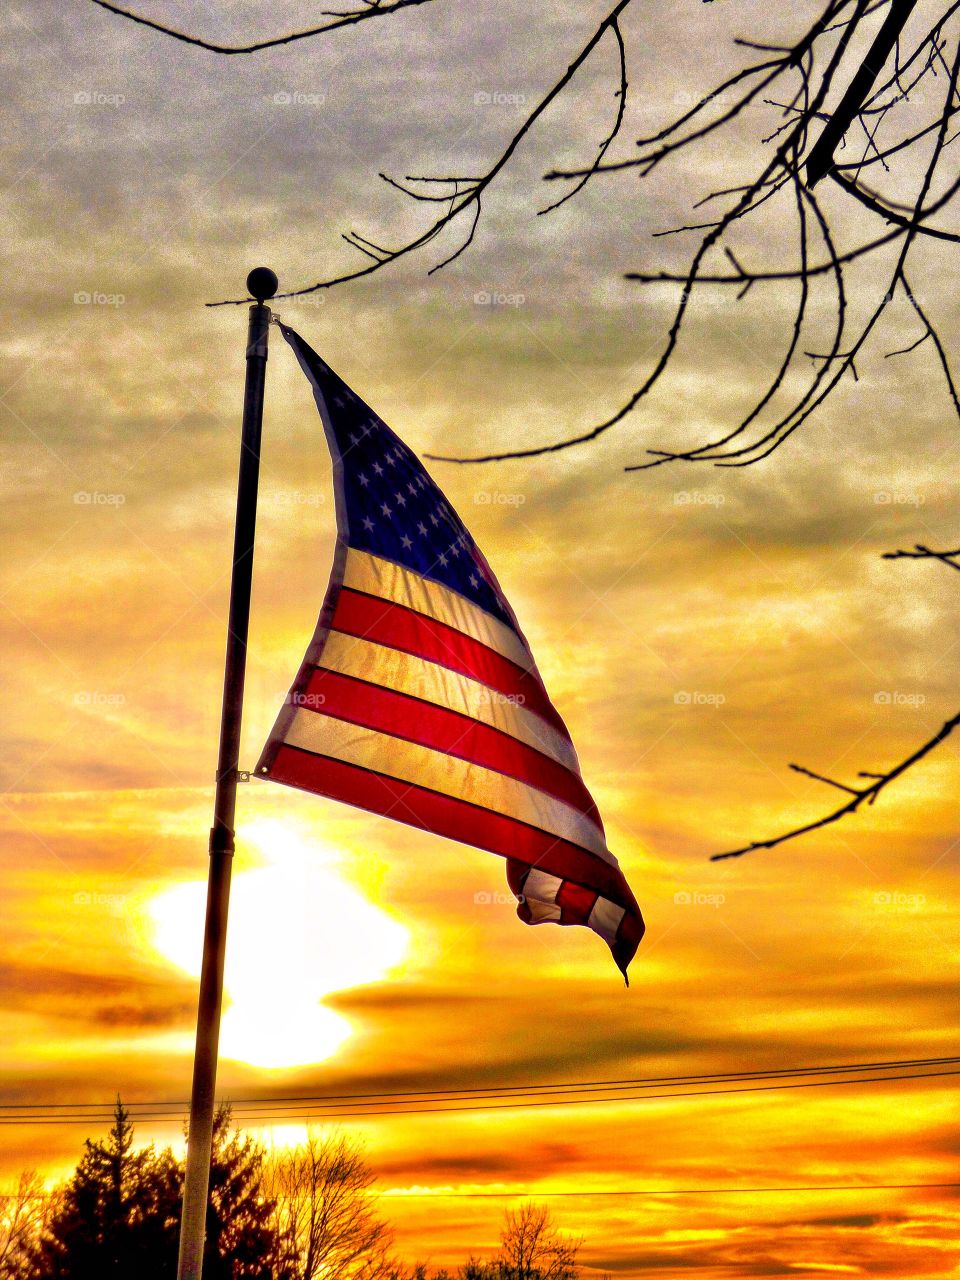 American flag at sunset